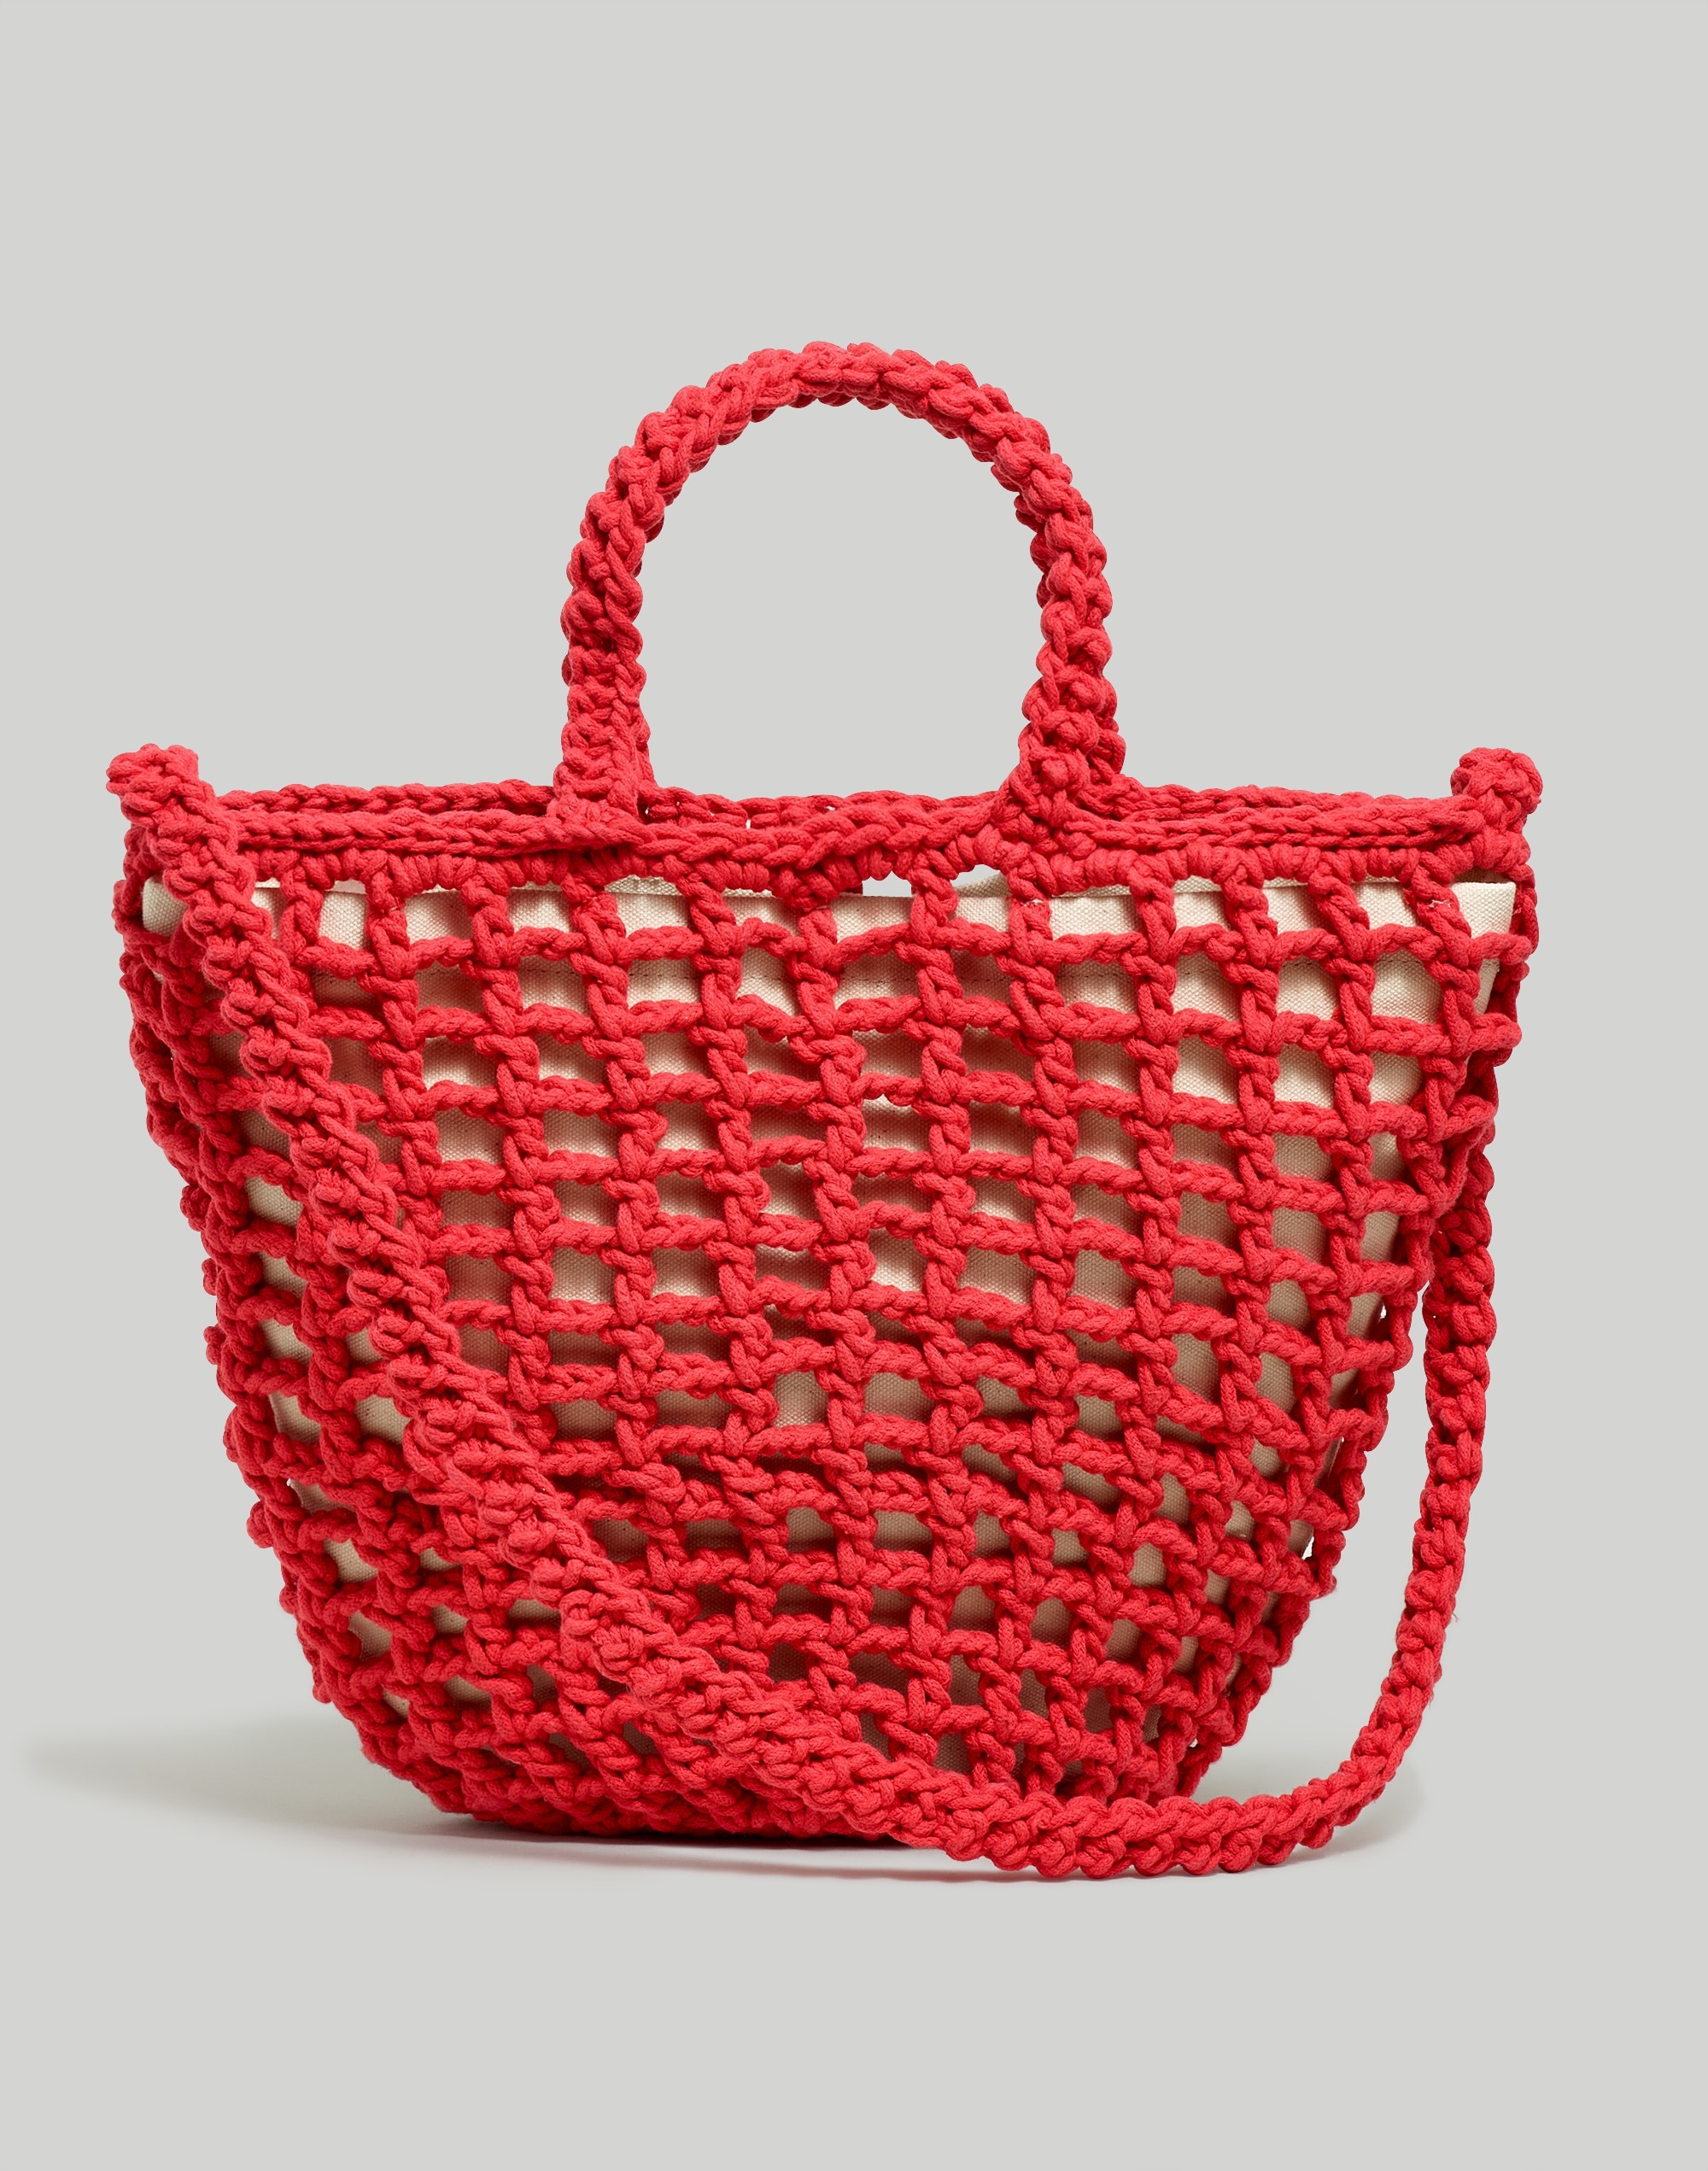 Mw The Crocheted Shoulder Bag In Bright Poppy